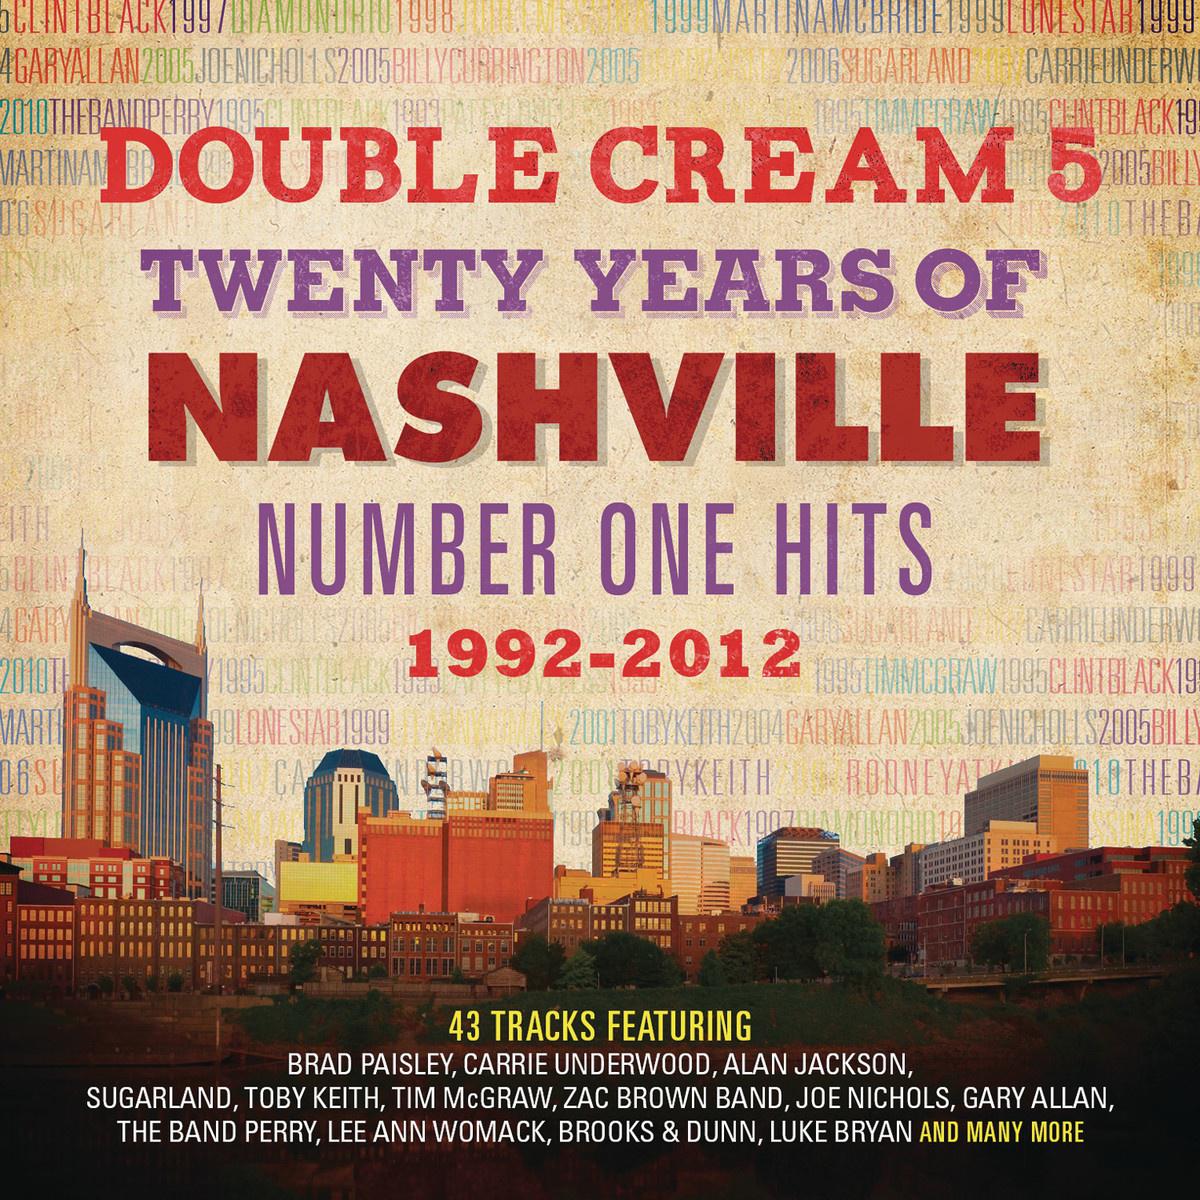 If I Die Young歌词 歌手The Band Perry-专辑Double Cream 5: 20 Years of Nashville #1's 1992-2012-单曲《If I Die Young》LRC歌词下载